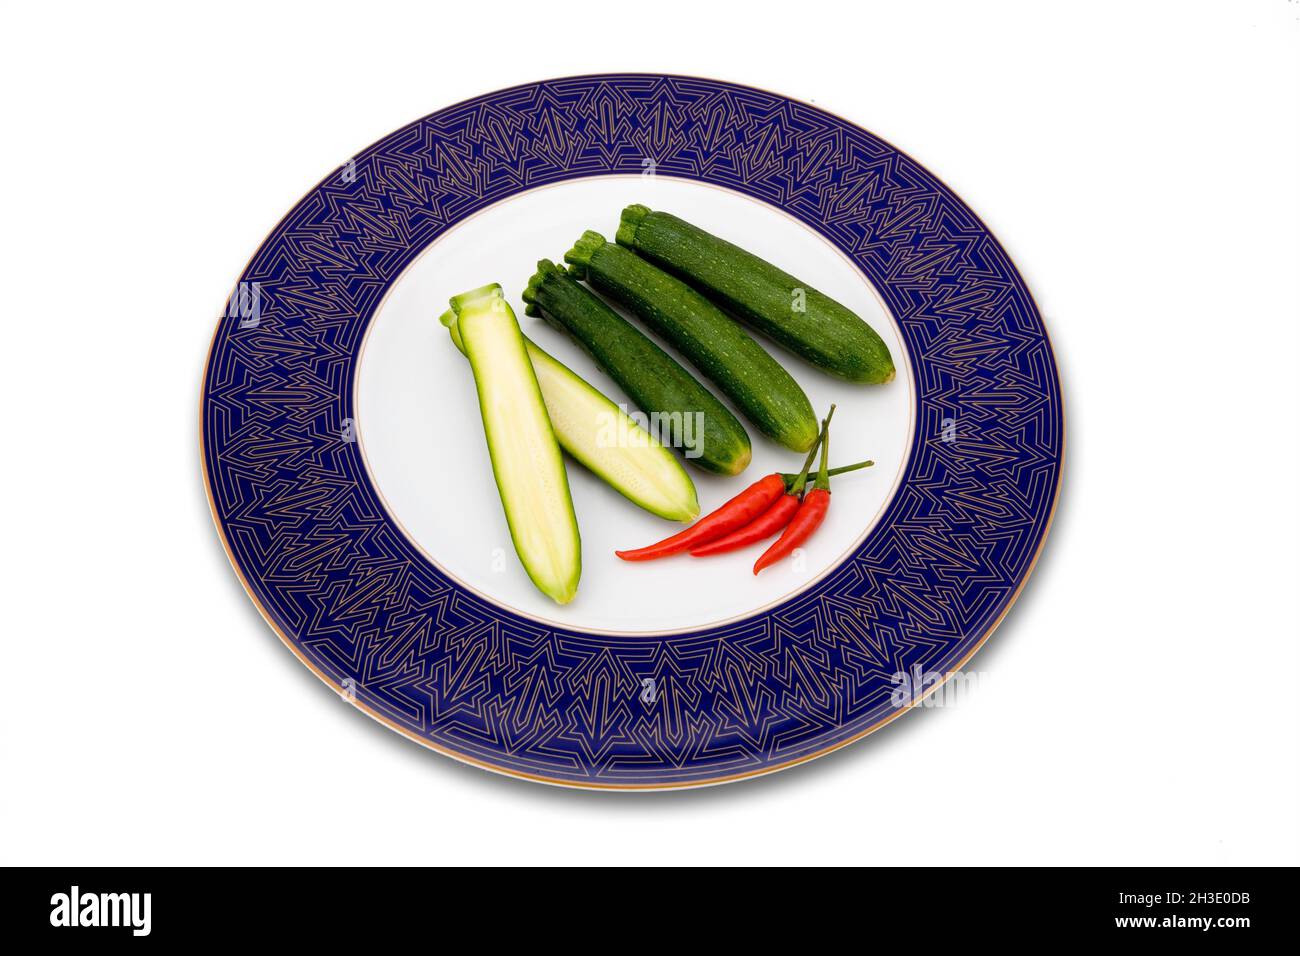 courgette, zucchini (Cucurbita pepo var. giromontiia, Cucurbita pepo subsp. pepo convar. giromontiina), courgettes on a plate, one of them halved Stock Photo